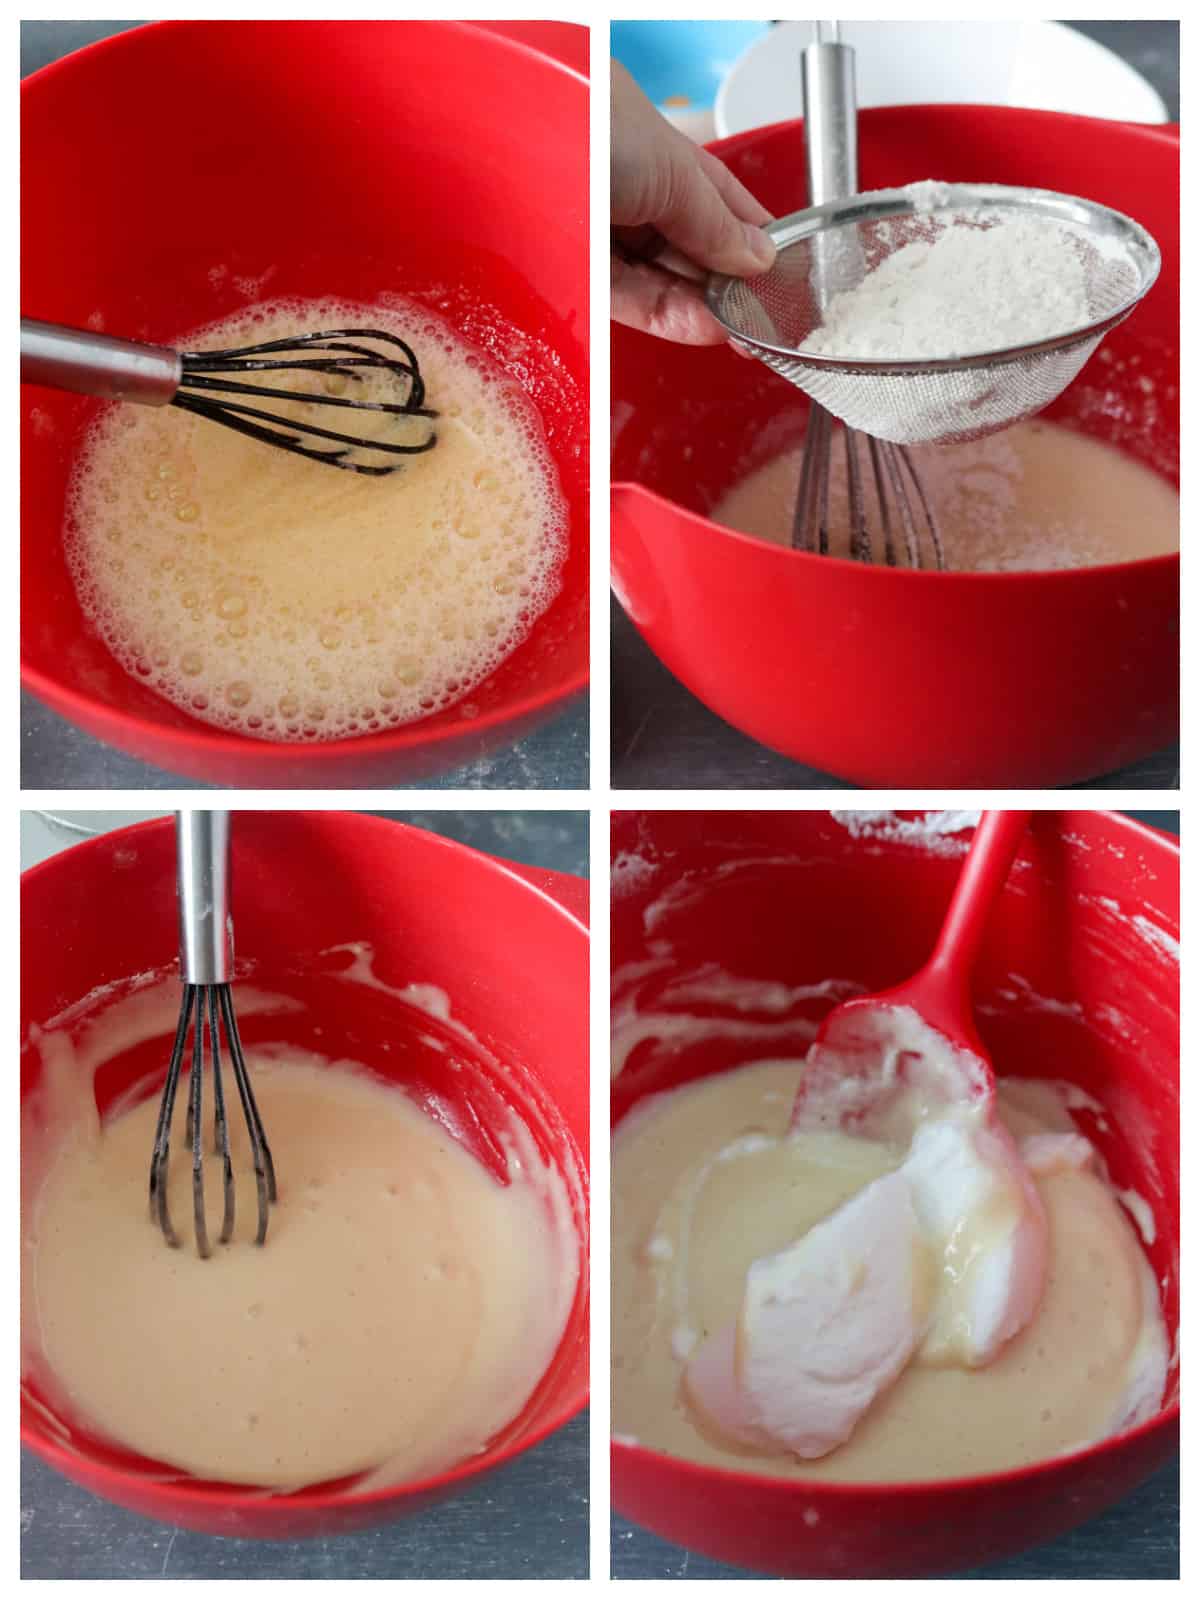 A collage showing the process of mixing the cake batter for chiffon cake.